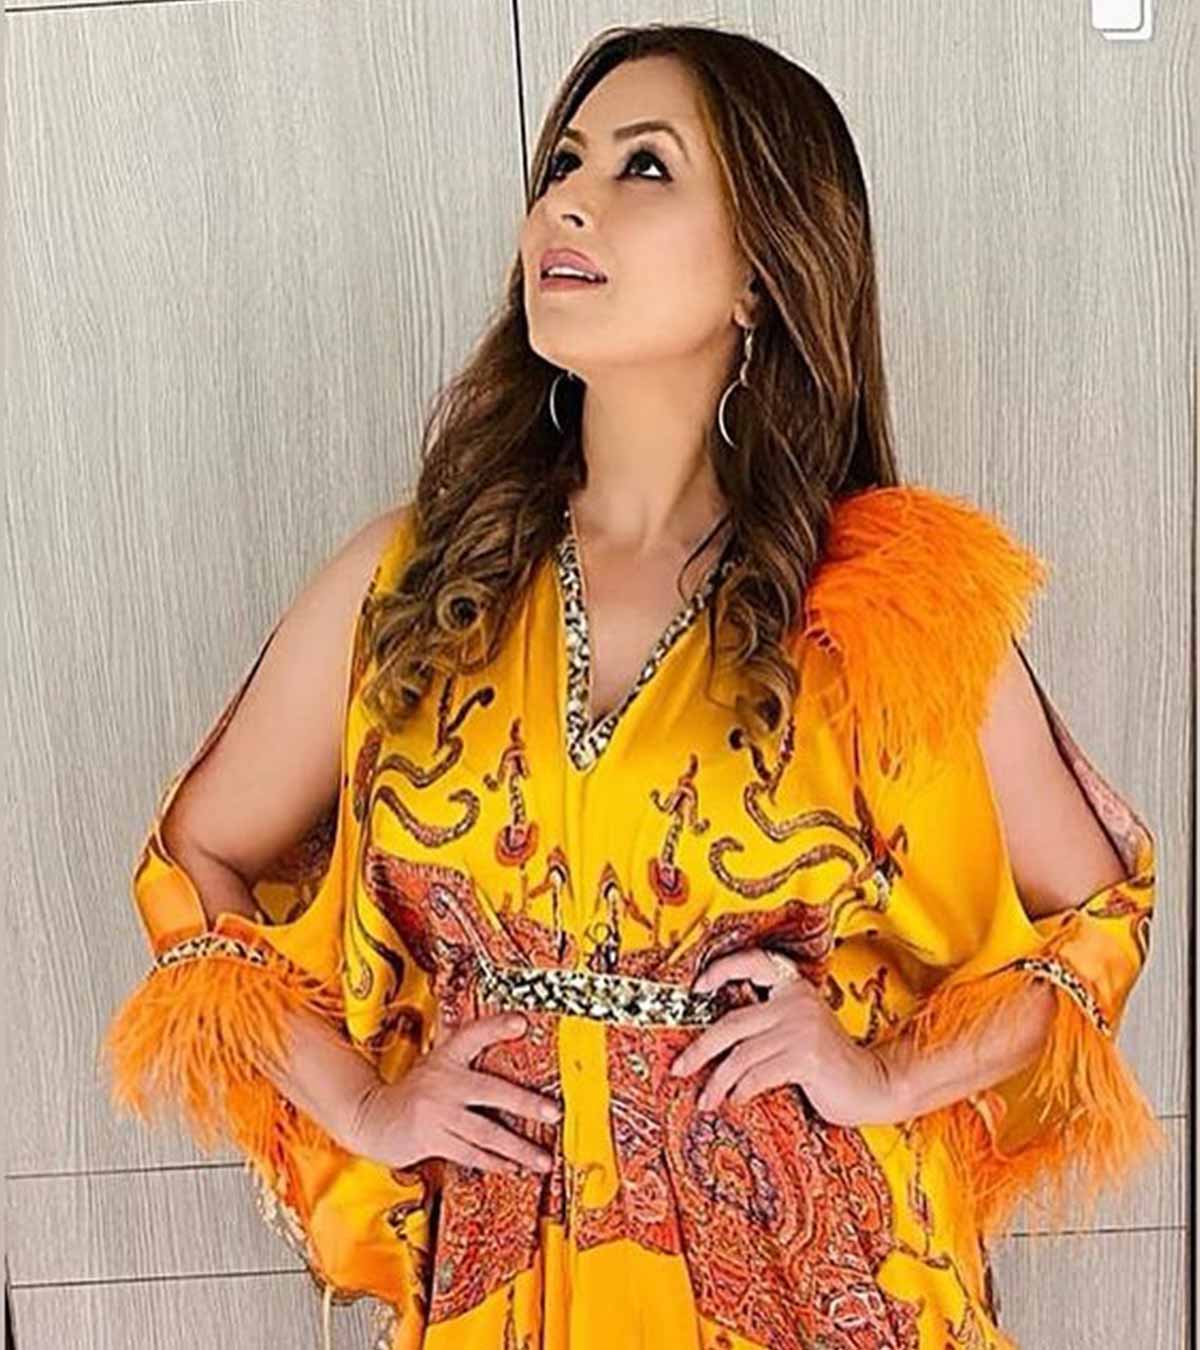 Mahima Chaudhry Talks About Her Miscarriages And Why She Didn’t Share Her Marital Issues With Anyone